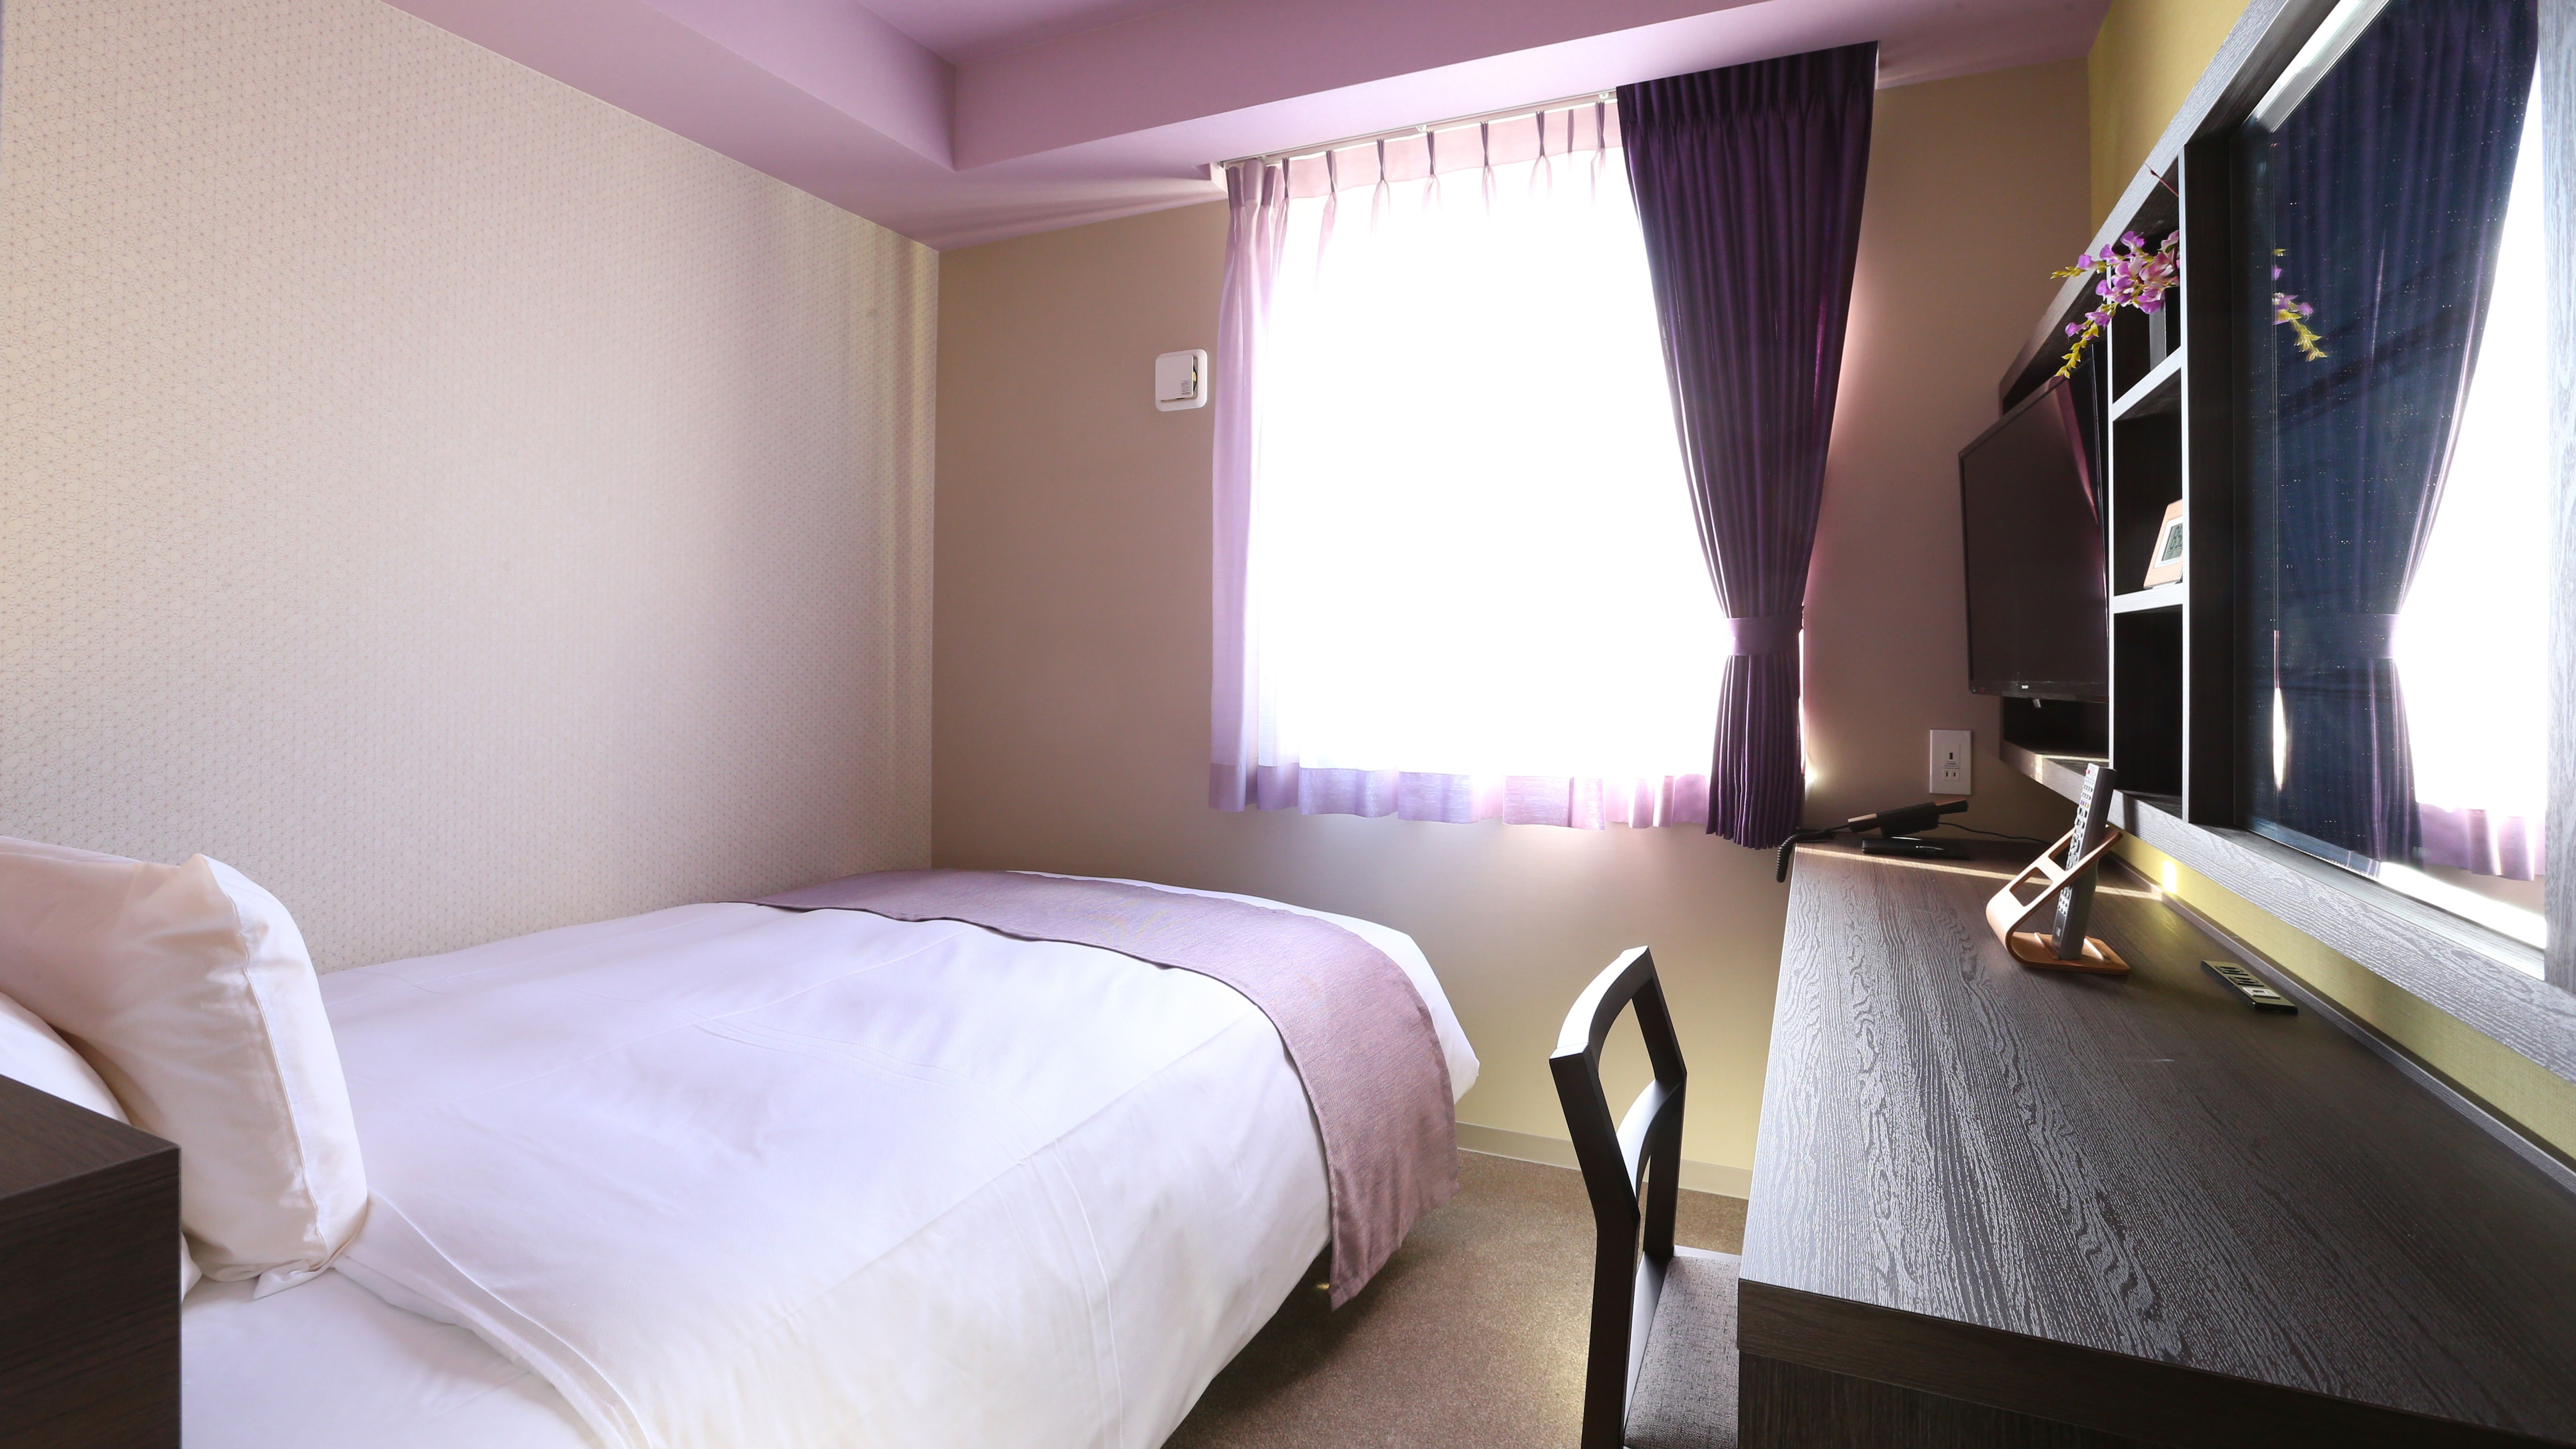 An example of the 13th floor wisteria (single/semi-double) guest room